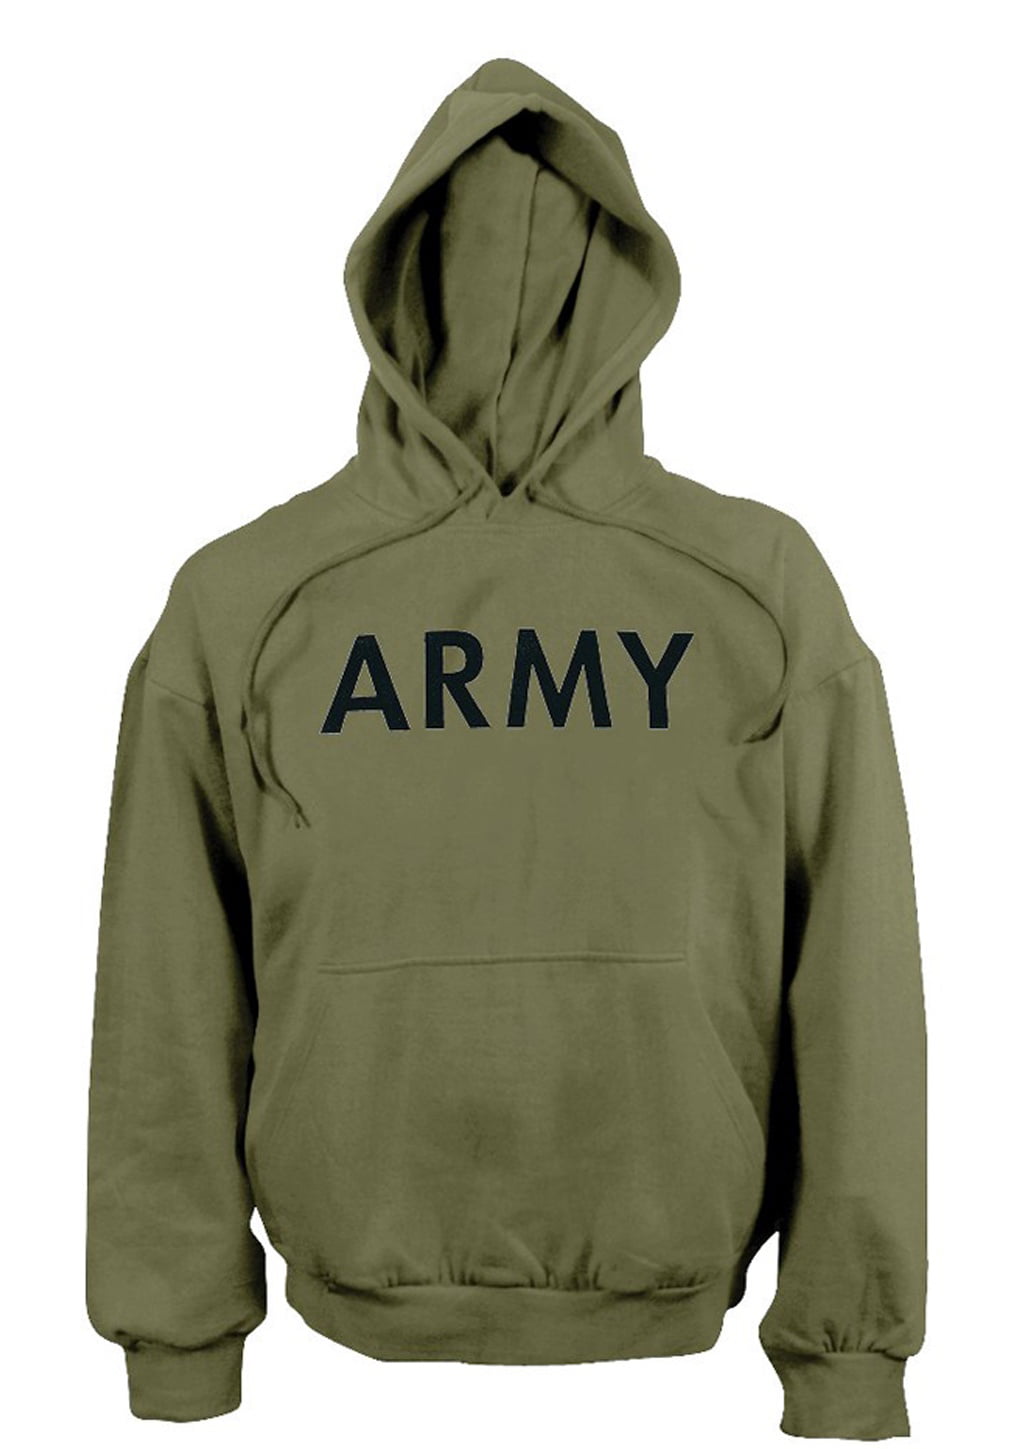 Army - Hooded Pullover Sweatshirt, Olive Drab Hoodie, Mens Size XL ...